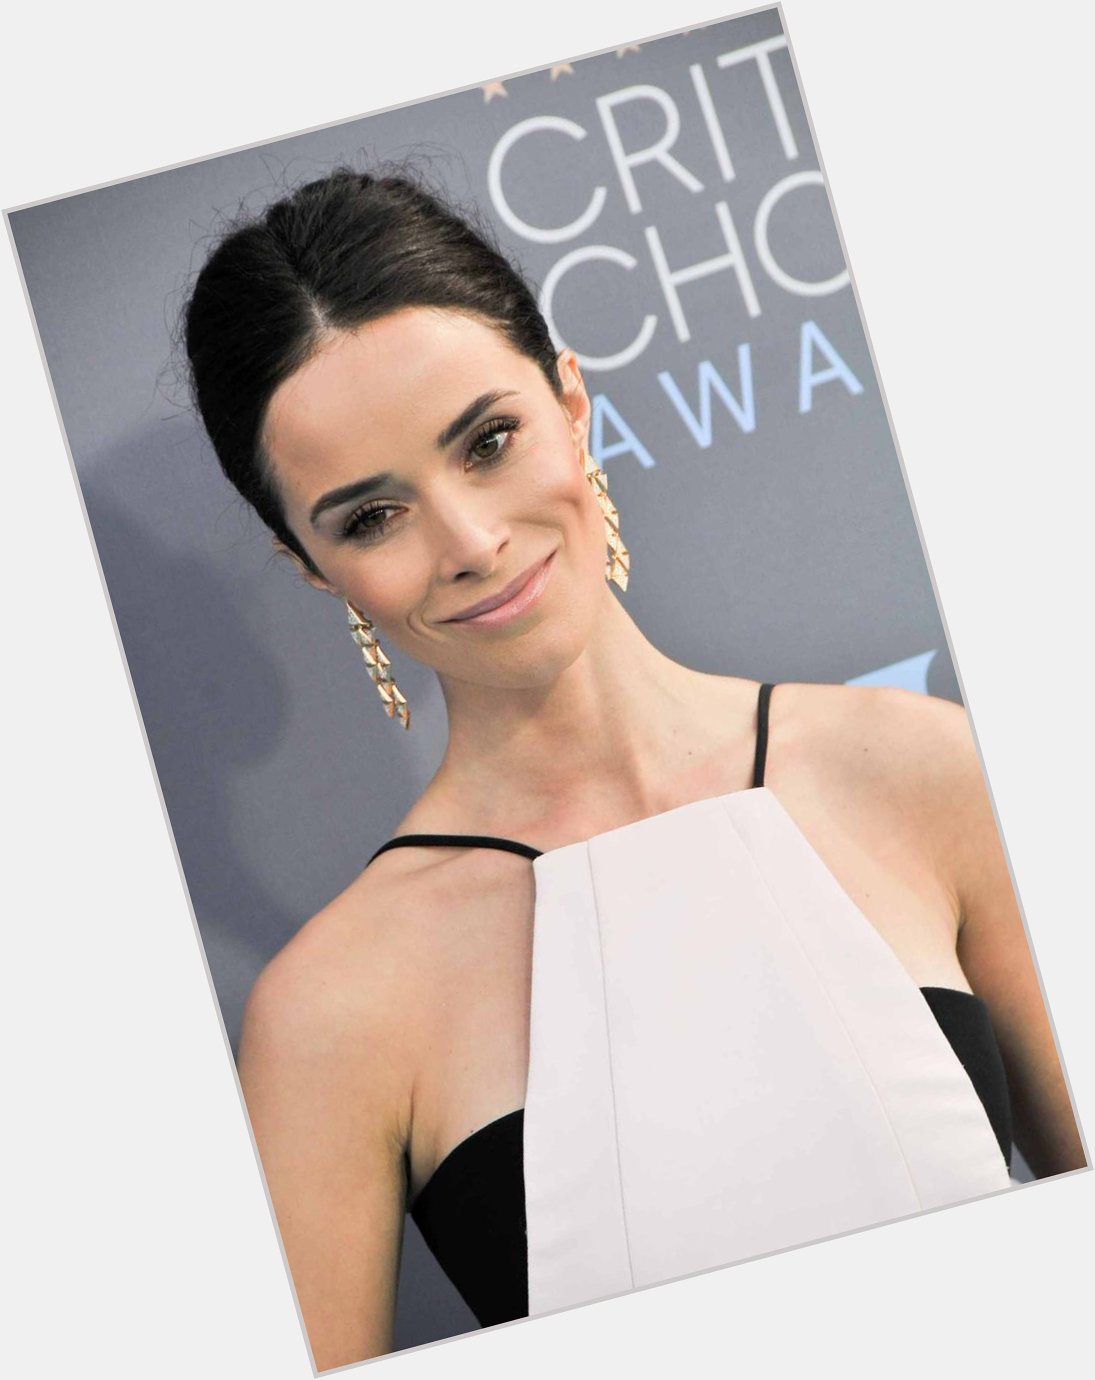 Also happy birthday to the radiant Abigail Spencer! 